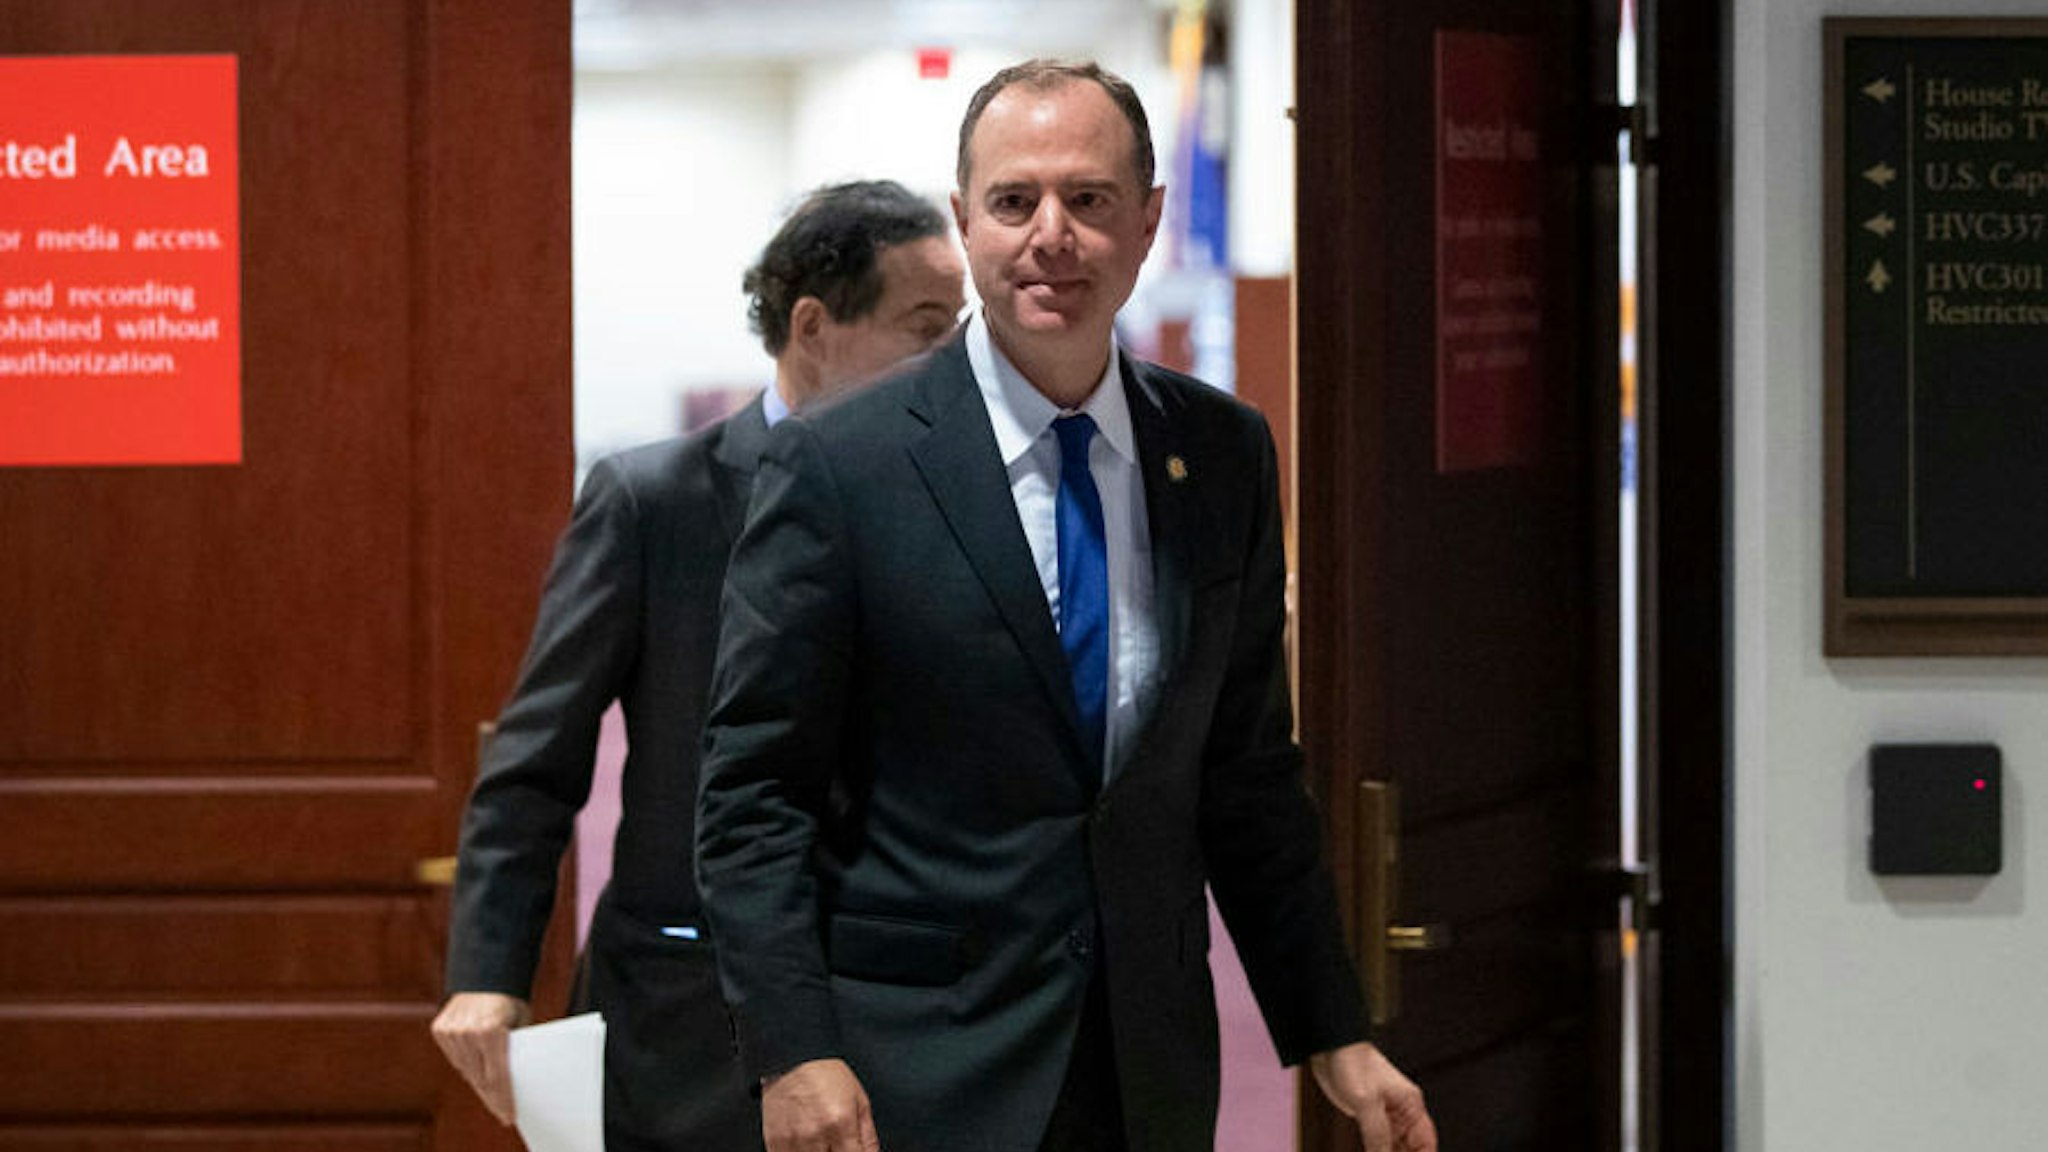 WASHINGTON, DC - NOVEMBER 4: U.S. House Intelligence Committee Chairman Rep. Adam Schiff (D-CA) exits a closed-door hearing with the House Intelligence, Foreign Affairs and Oversight committees at the U.S. Capitol on November 4, 2019 in Washington, DC. On Monday, House investigators released the first transcripts from closed-door depositions in the impeachment inquiry. Four White House officials scheduled for depositions in the impeachment inquiry on Monday have signaled that they will not show up